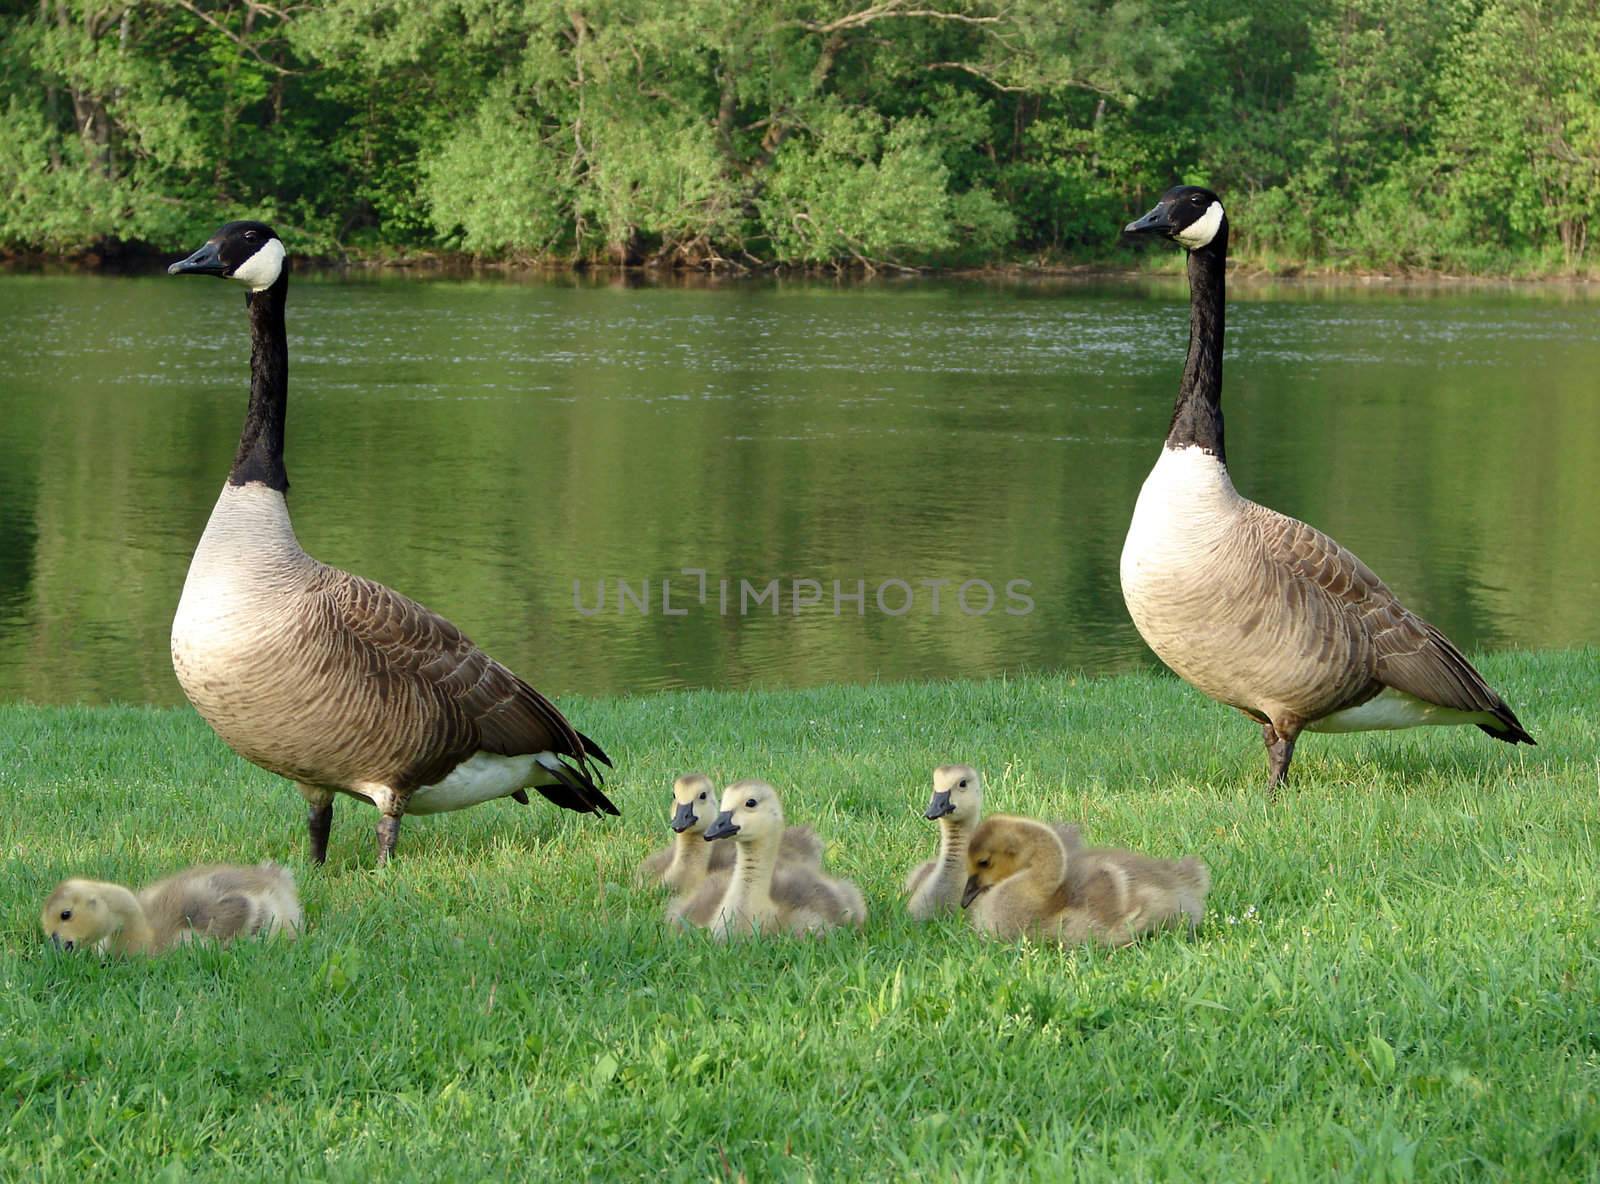 Geese and their babies by Thorvis